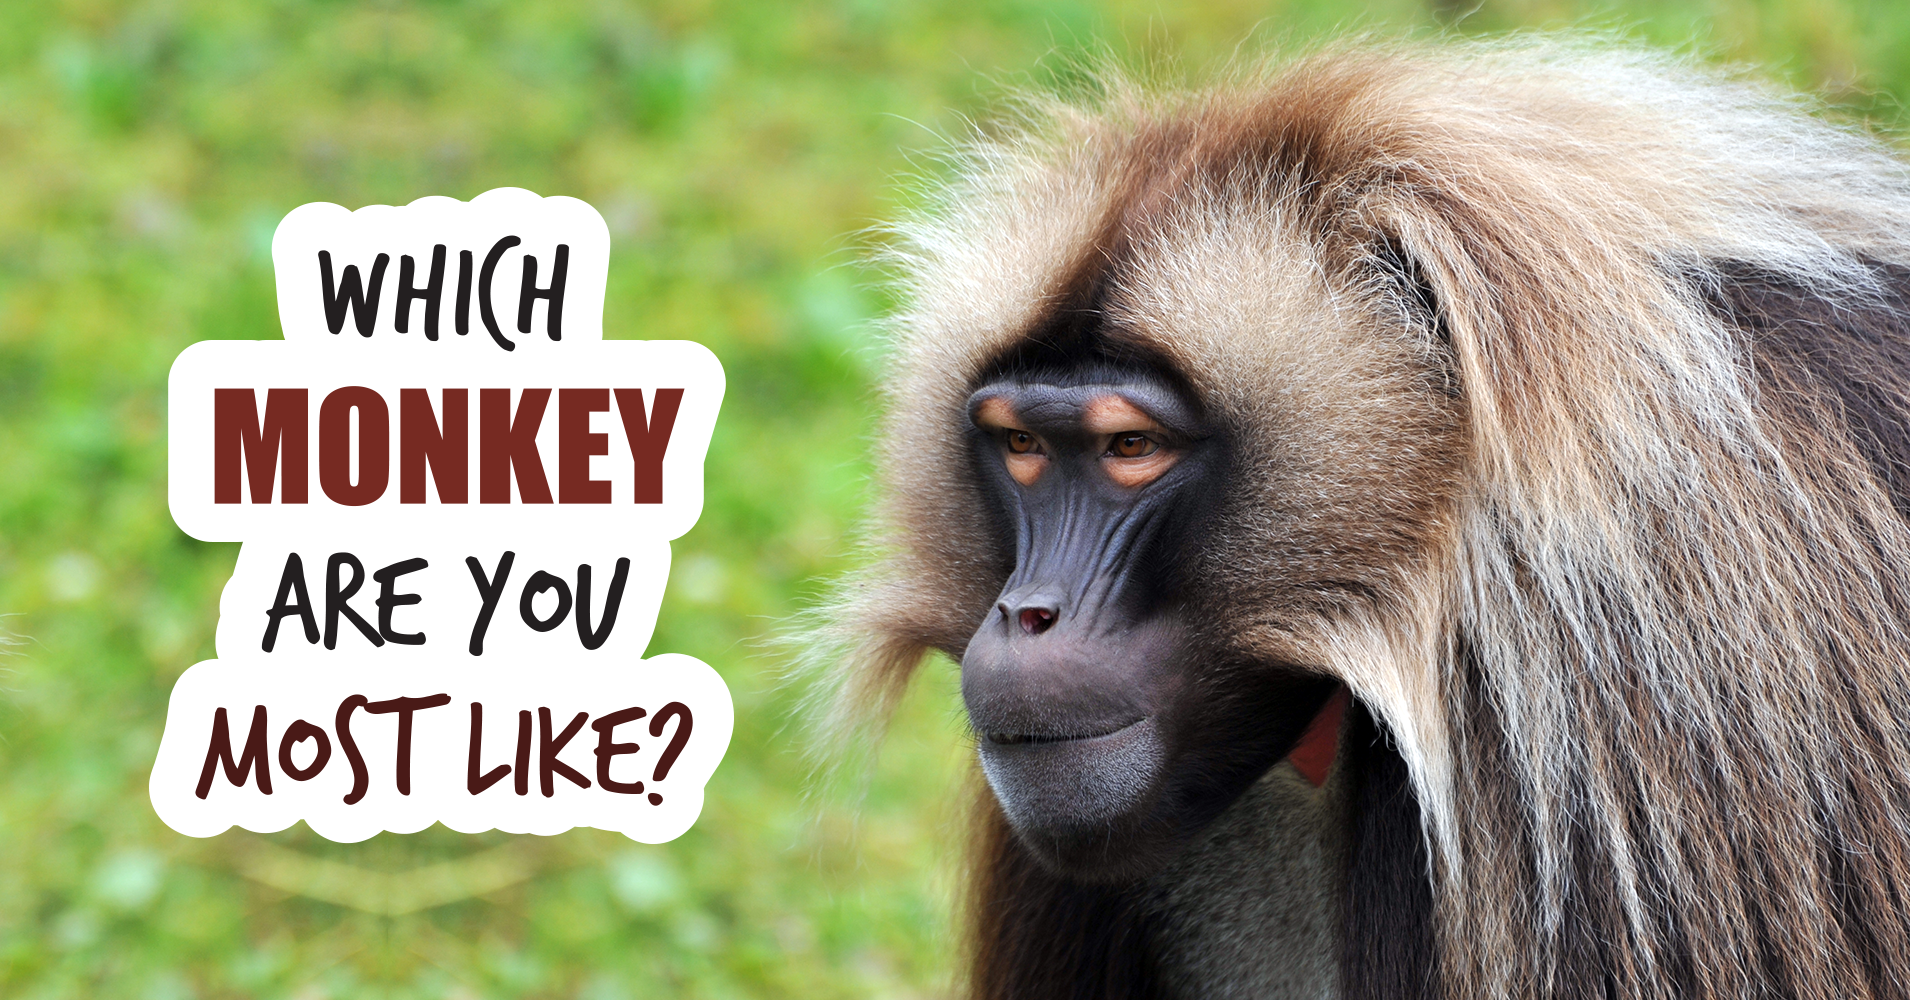 Which Monkey Are You Most Like? - Quiz - Quizony.com